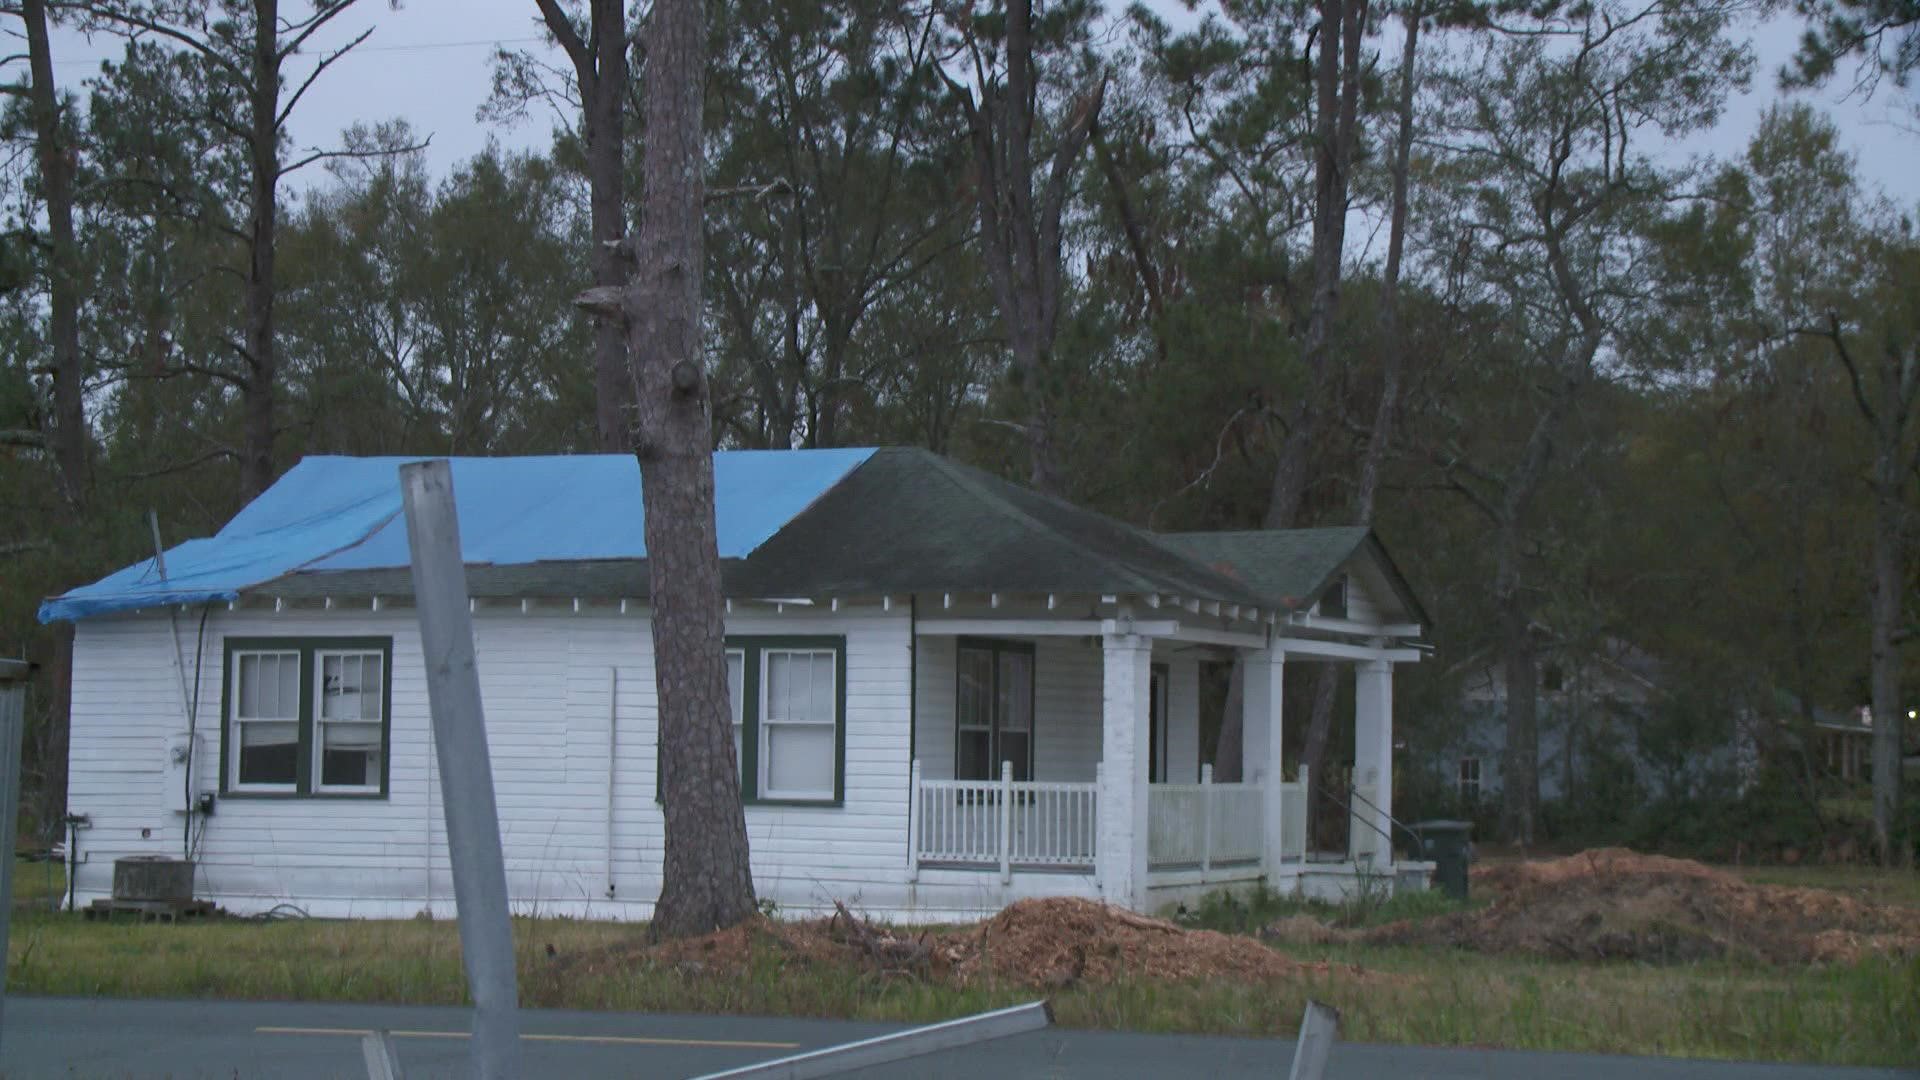 Communities on the Northshore are still having a hard time trying to recover and rebuild from Hurricane Ida.